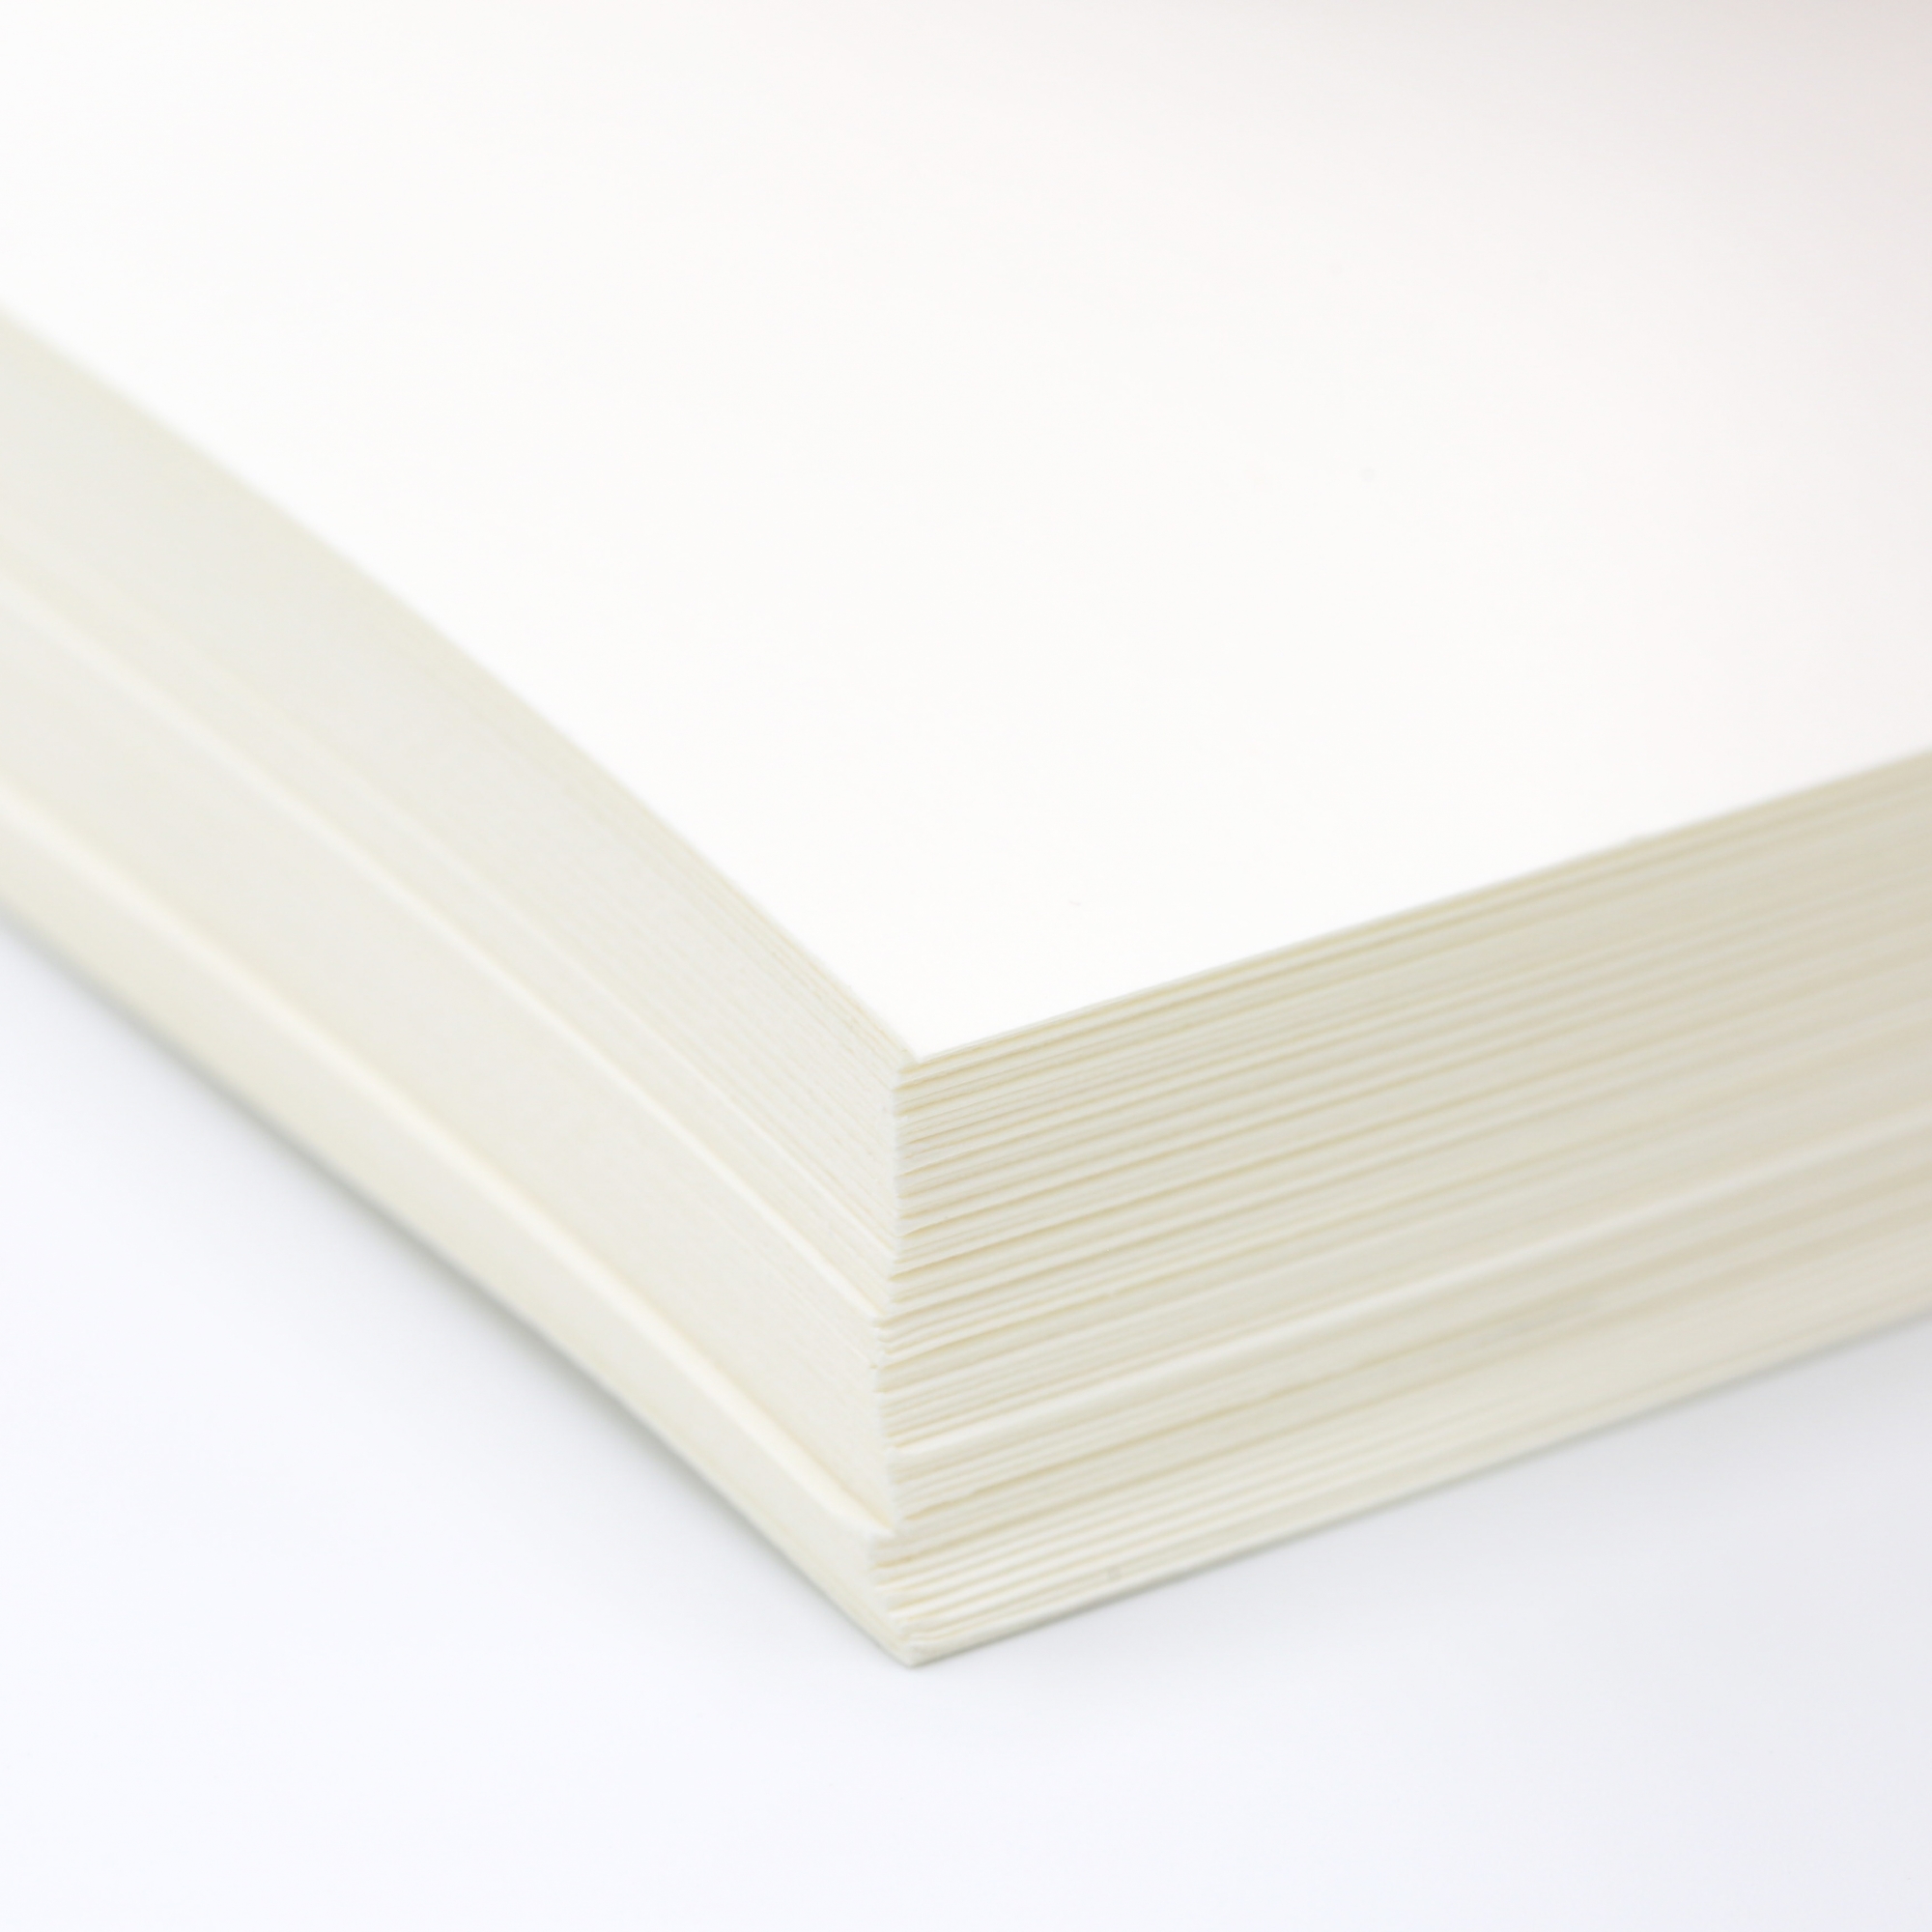 Classic Laid Cover Natural White 18x12 100lb/270g 125/pkg | Paper,  Envelopes, Cardstock & Wide format | Quick shipping nationwide | Paperworks